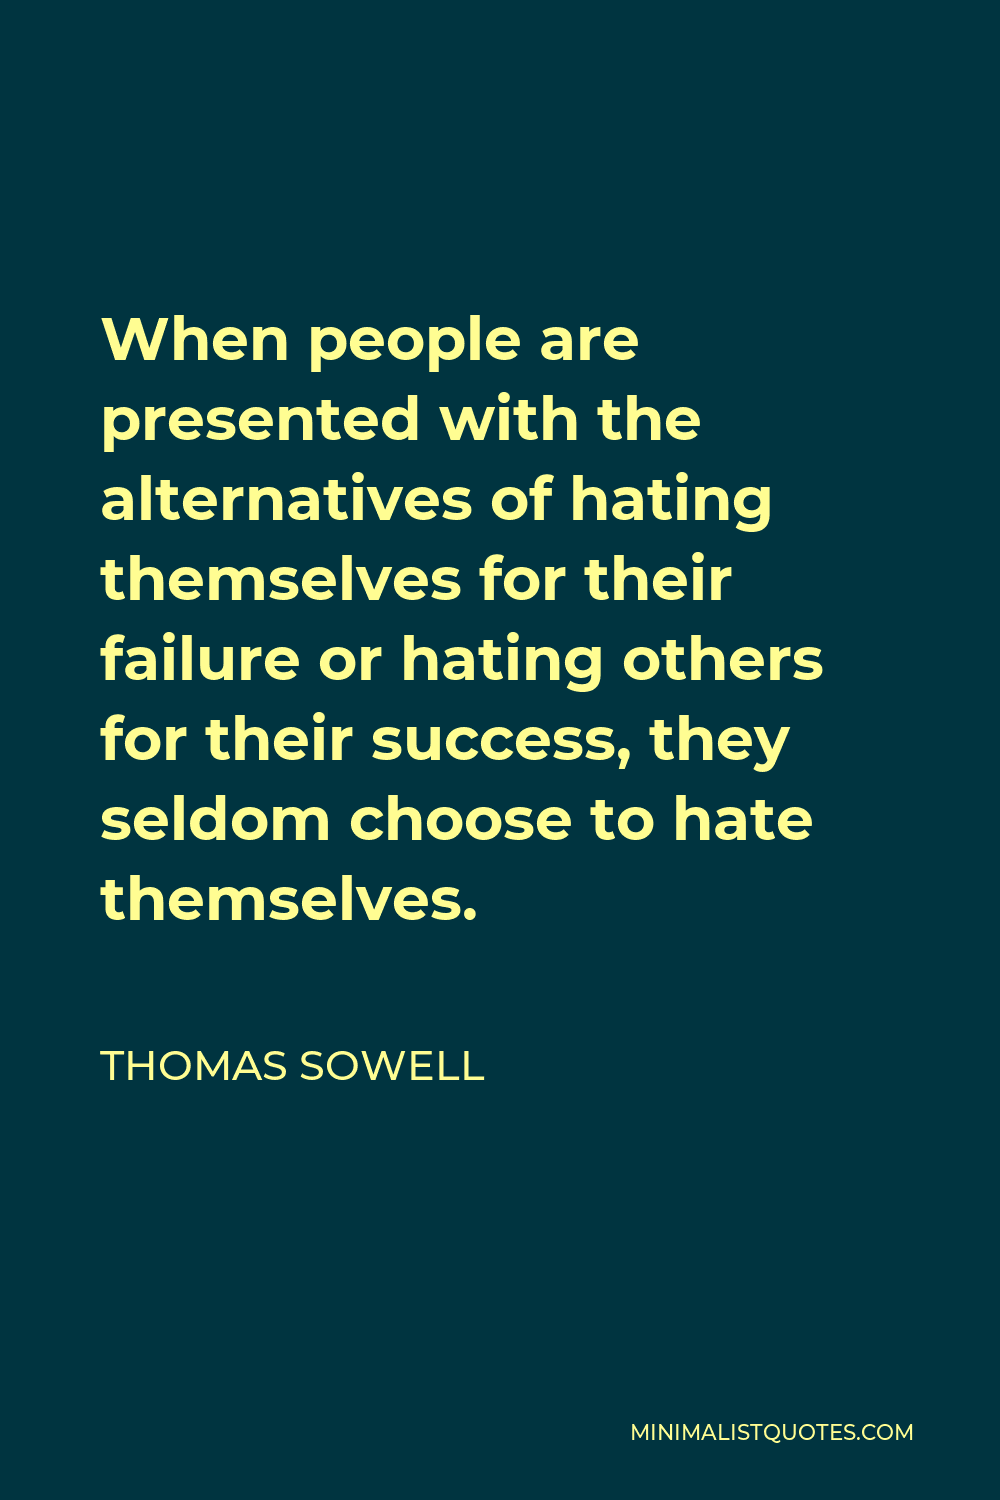 Thomas Sowell Quote - When people are presented with the alternatives of hating themselves for their failure or hating others for their success, they seldom choose to hate themselves.